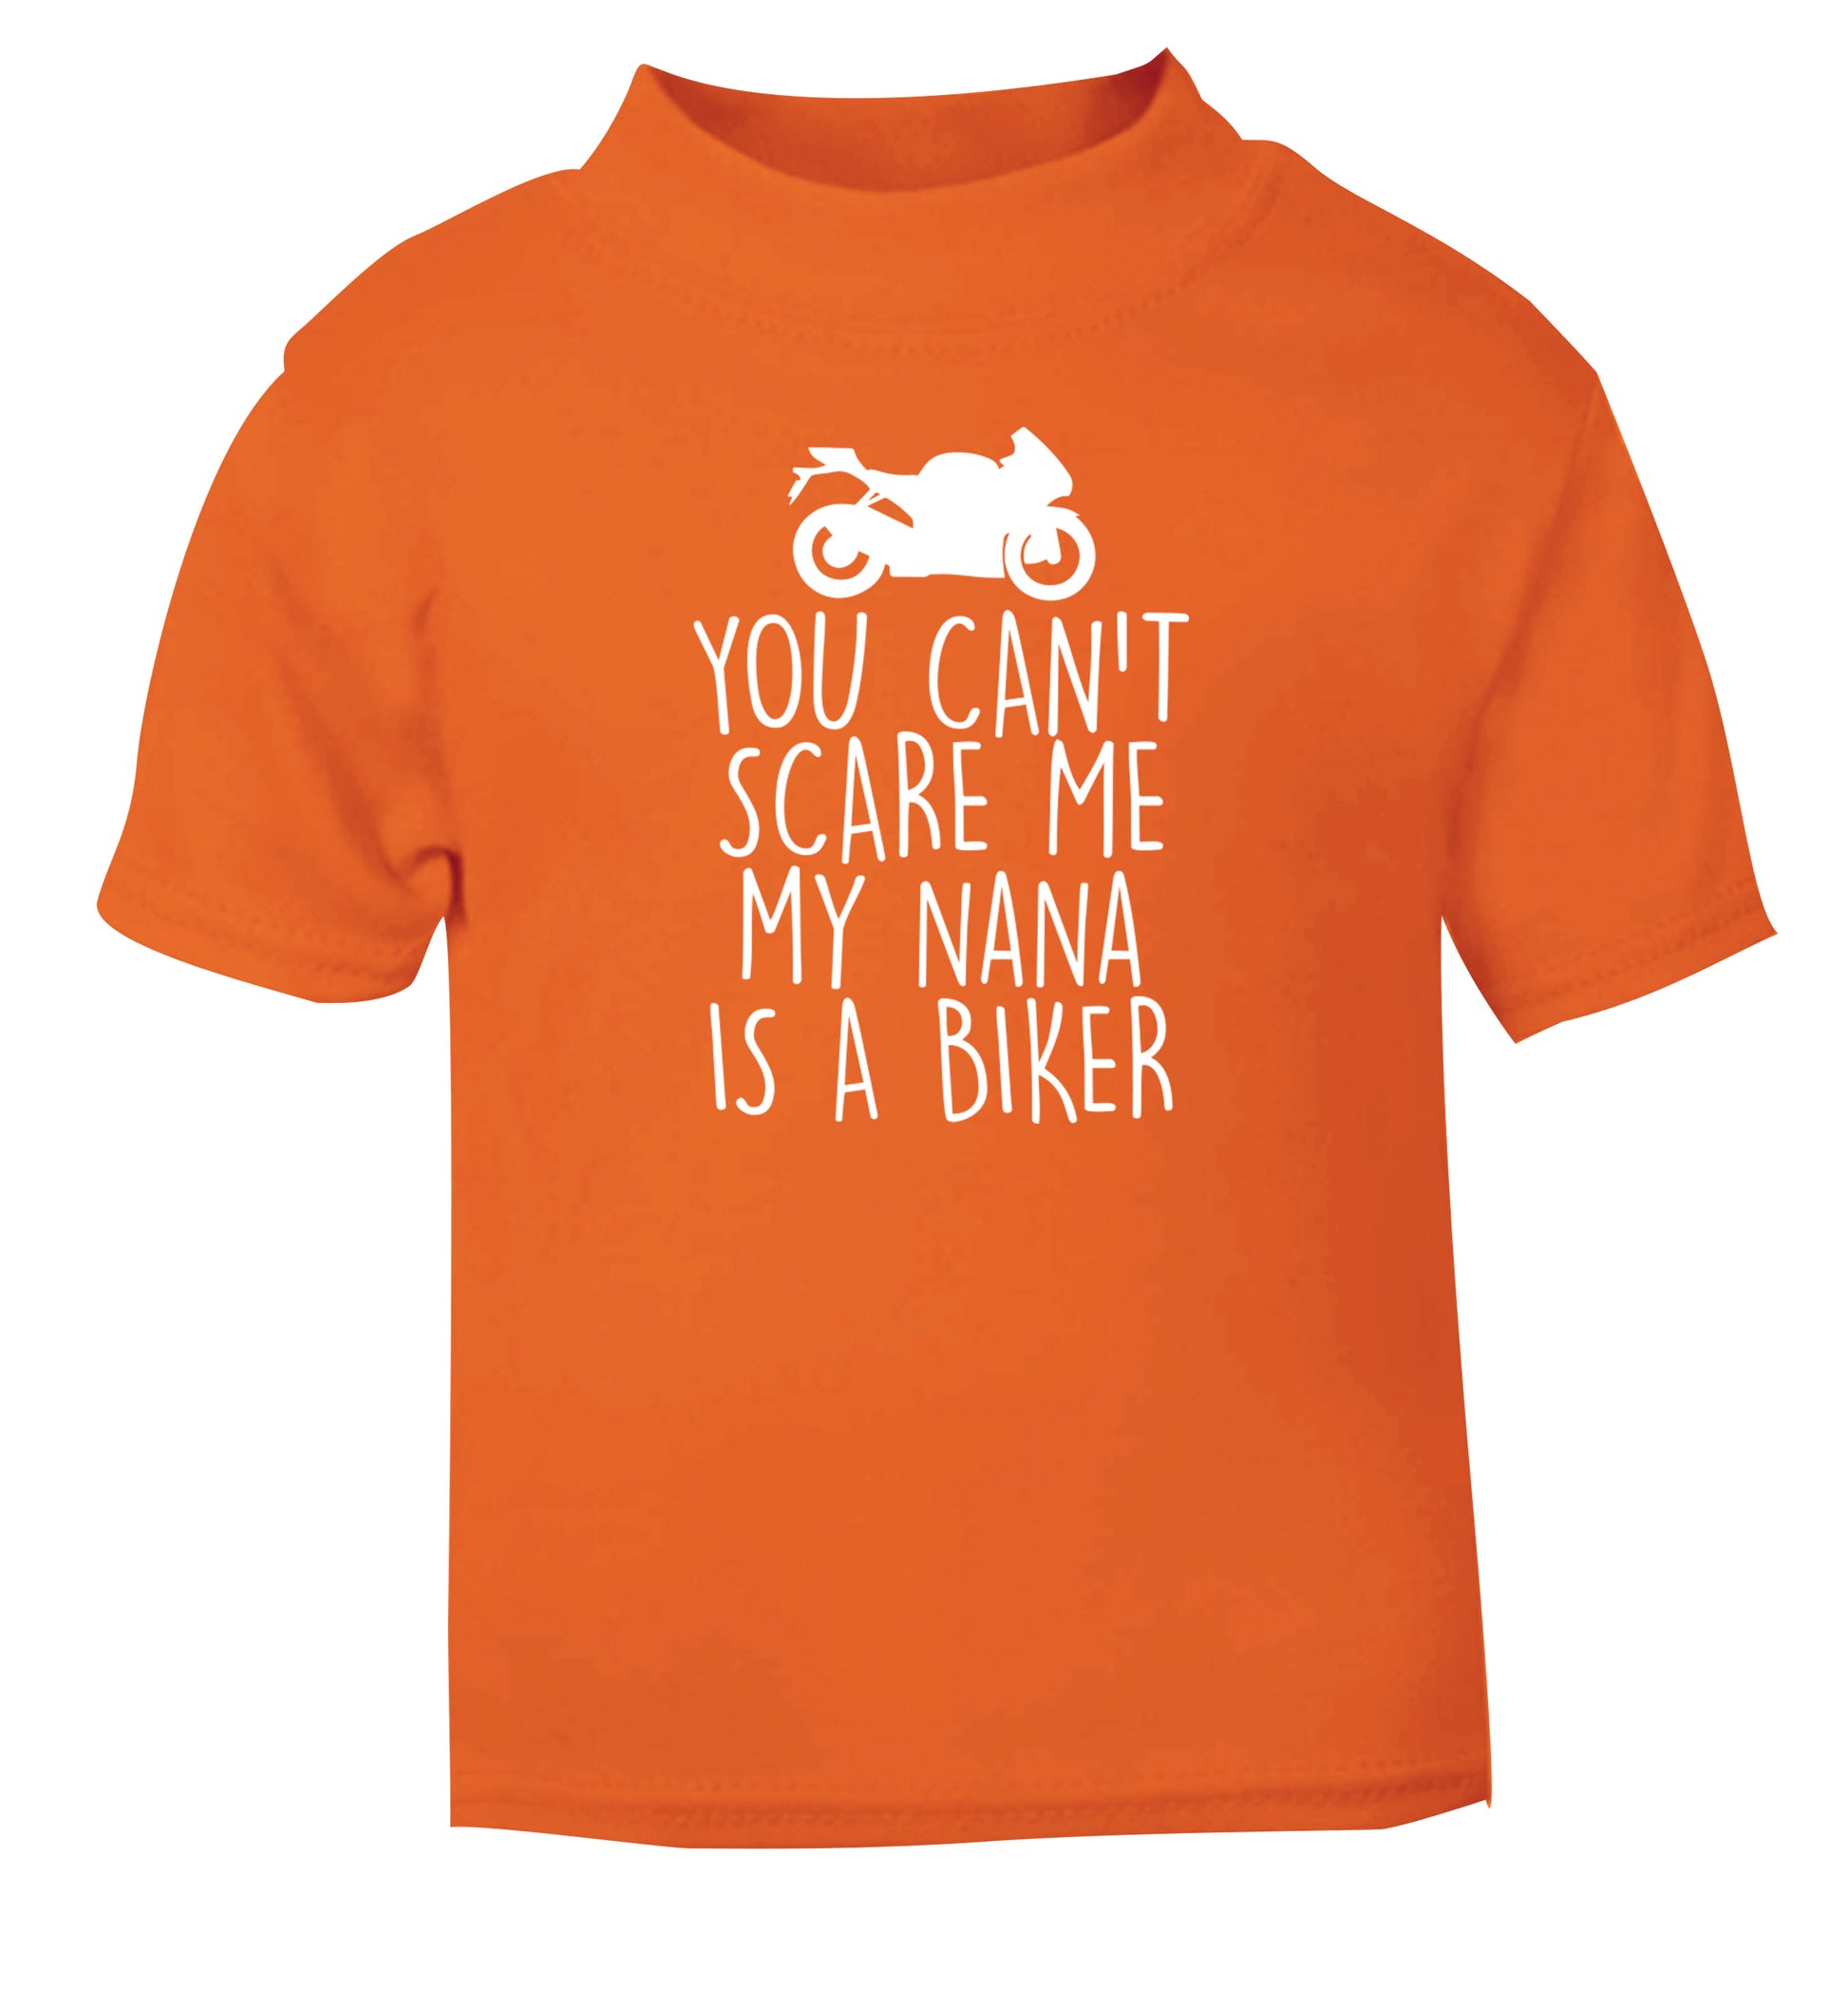 You can't scare me my nana is a biker orange Baby Toddler Tshirt 2 Years